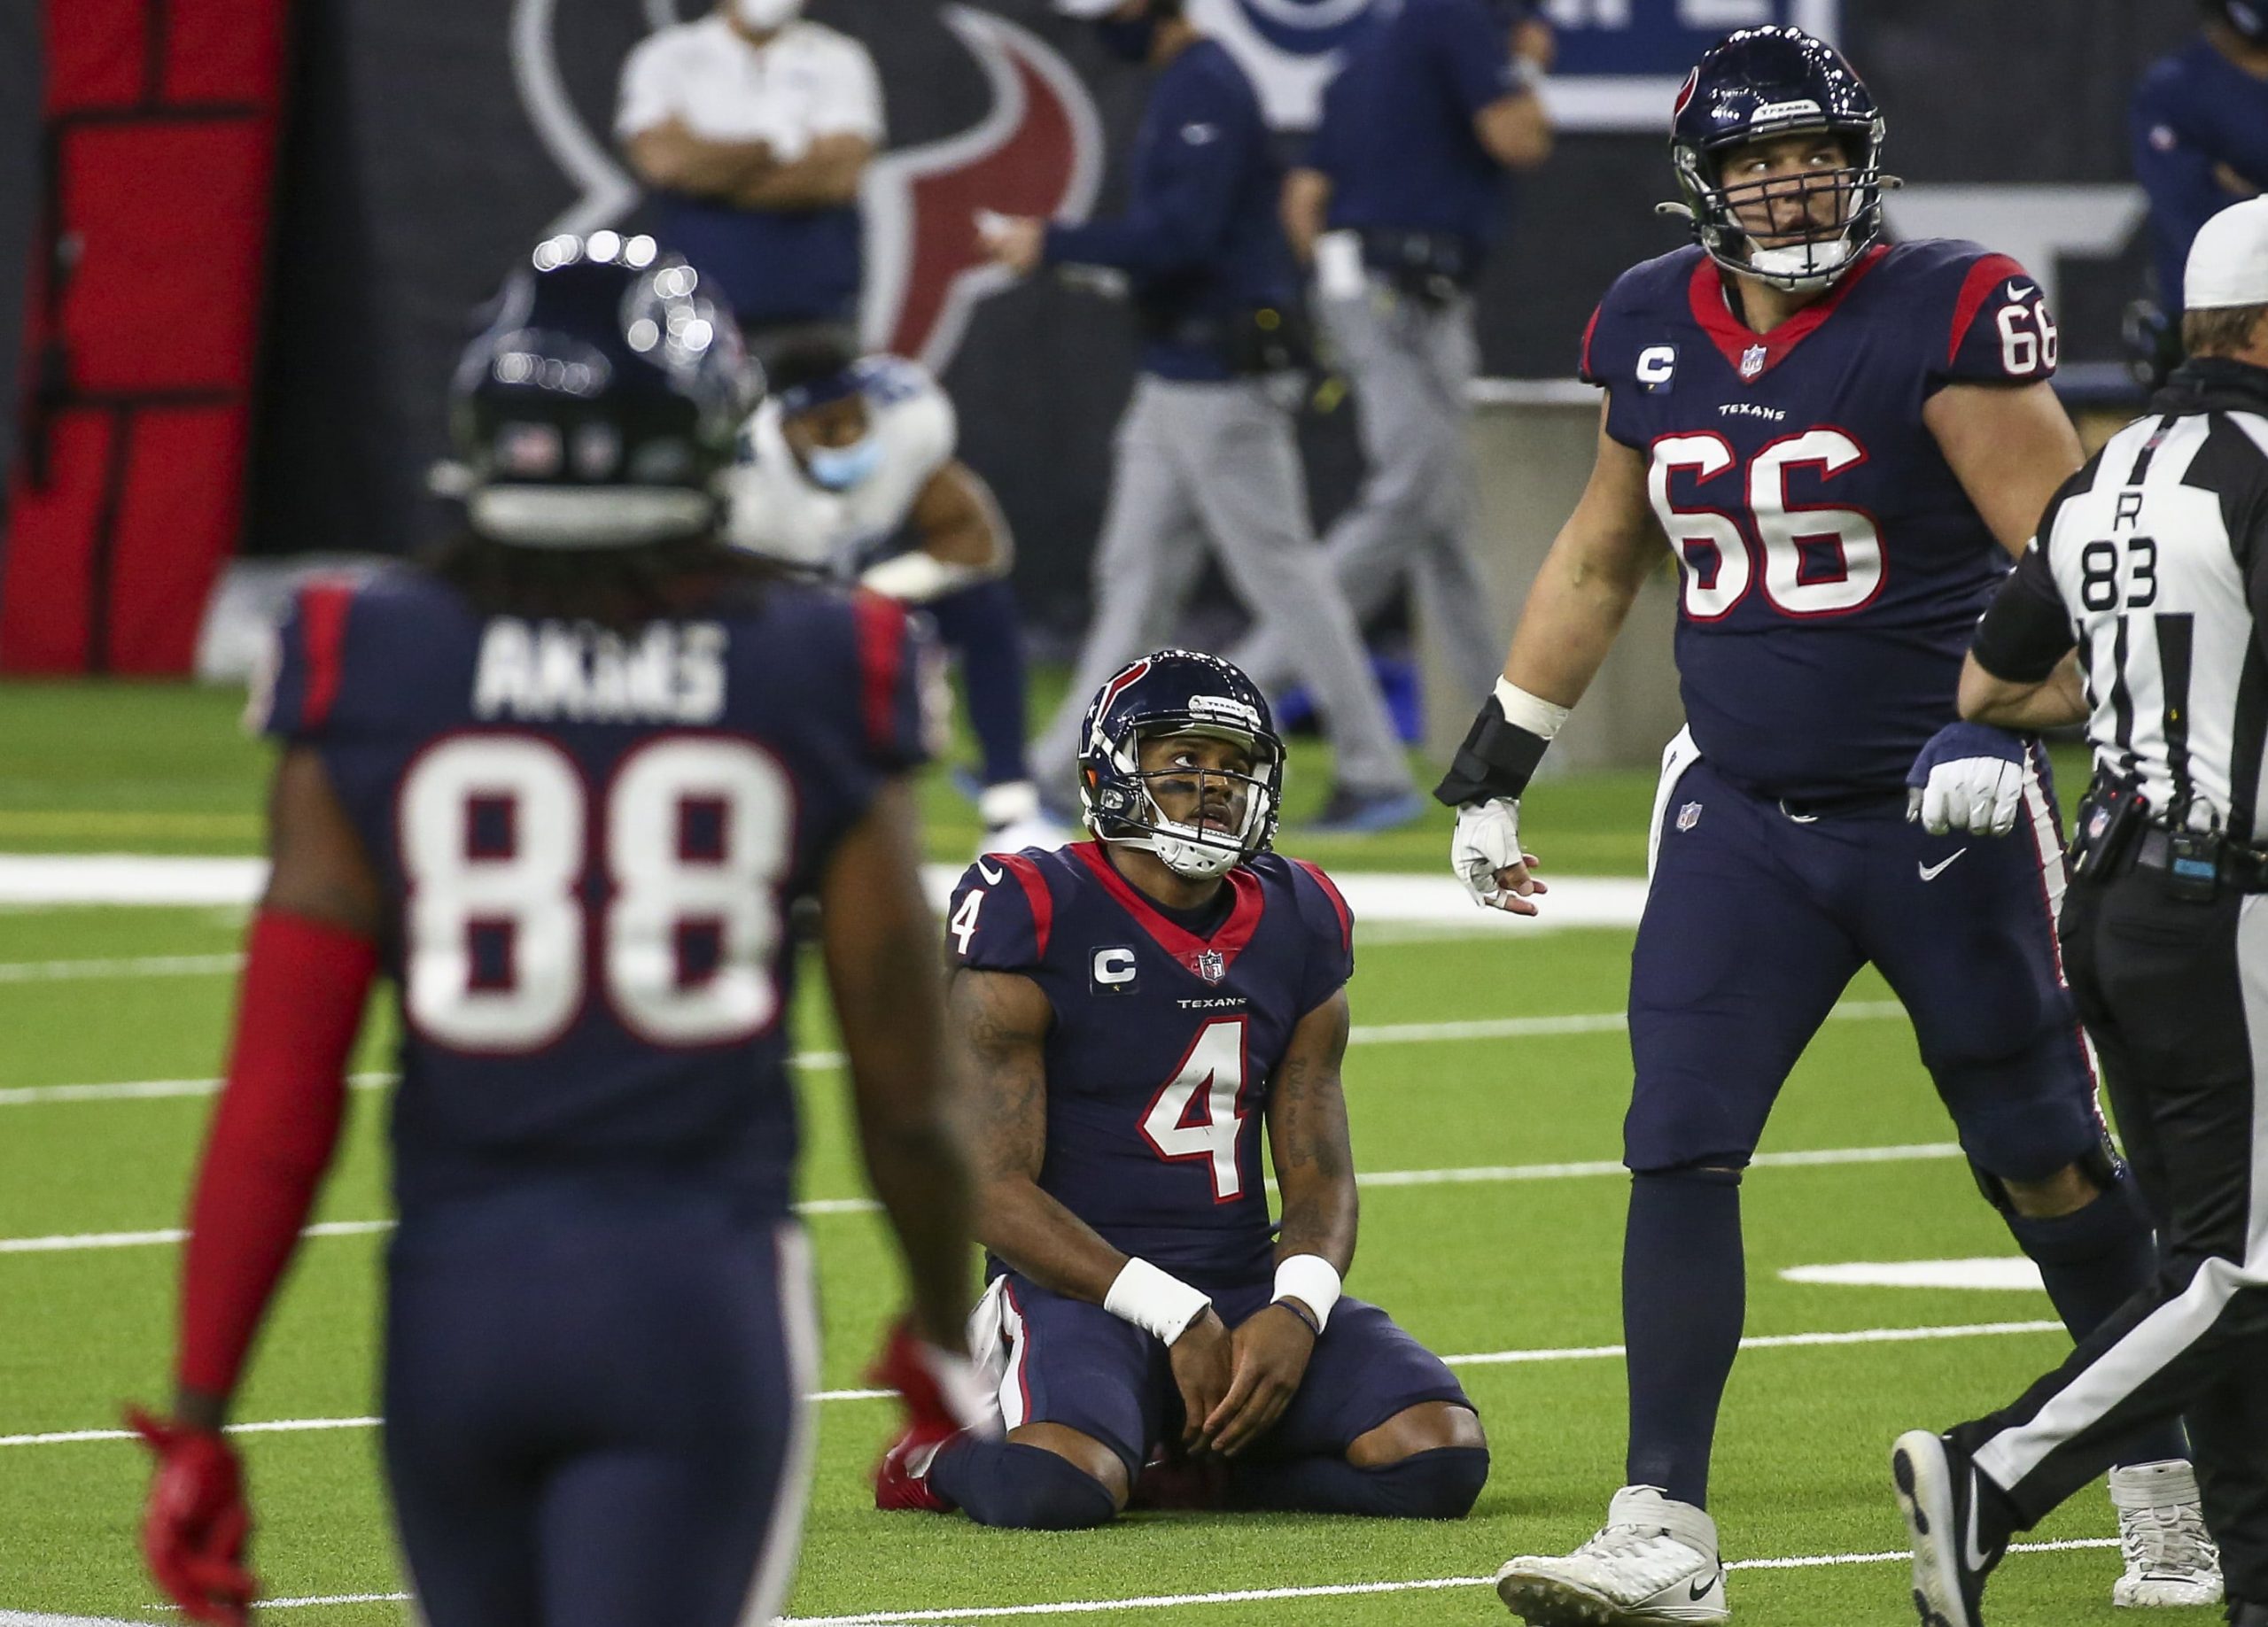 Houston Texans quarterback Deshaun Watson (4) looks up after a play during the fourth quarter against the Tennessee Titans at NRG Stadium.